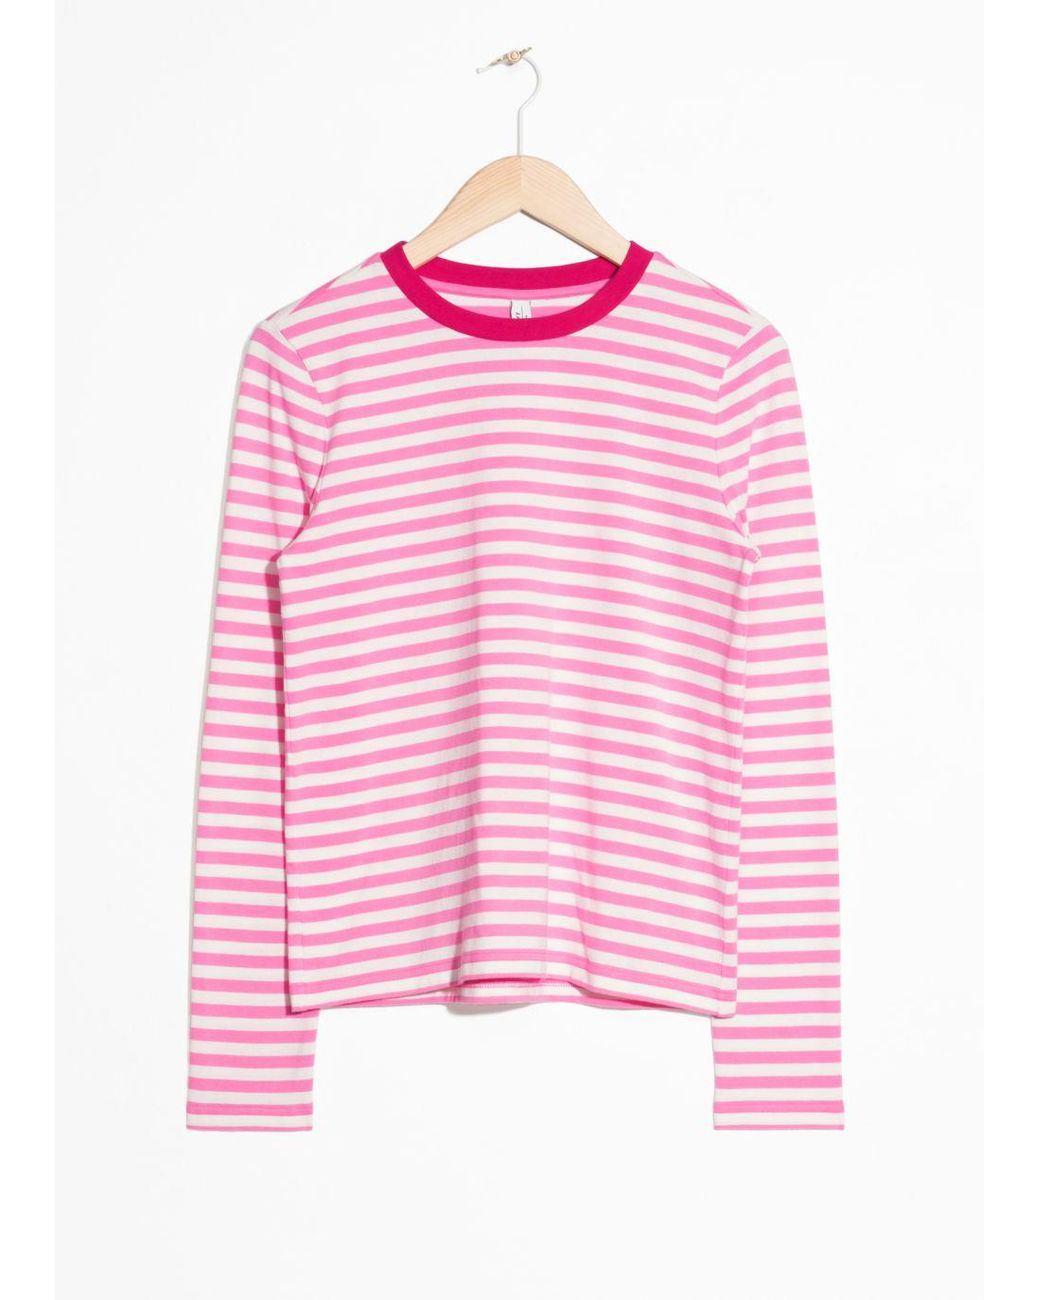 & Other Stories Striped Long Sleeve T-shirt in Pink | Lyst